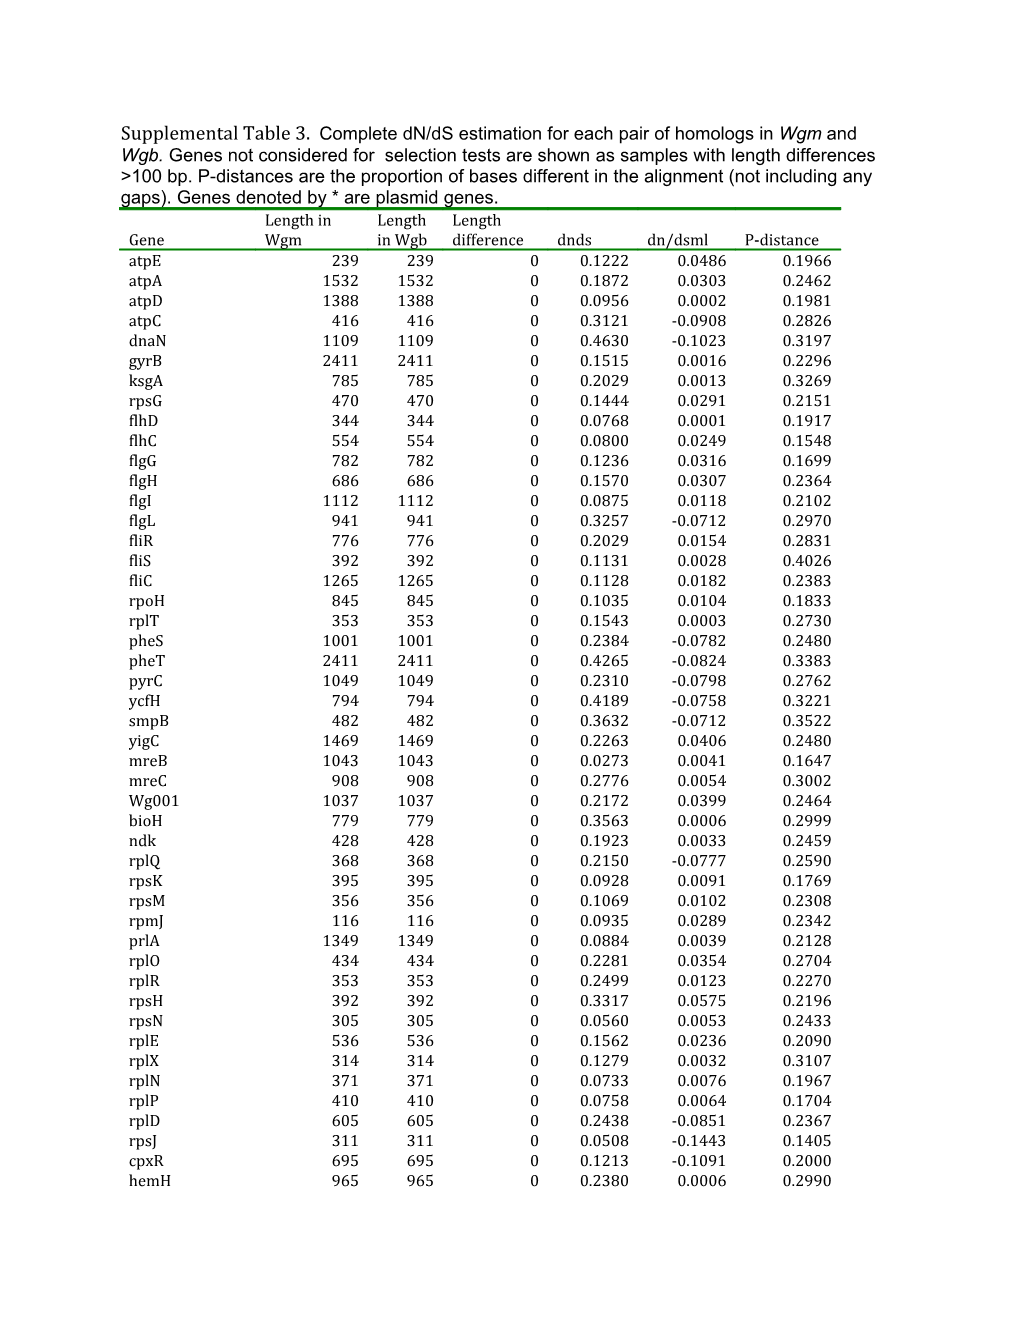 Supplemental Table 3. Complete Dn/Ds Estimation for Each Pair of Homologs in Wgm and Wgb